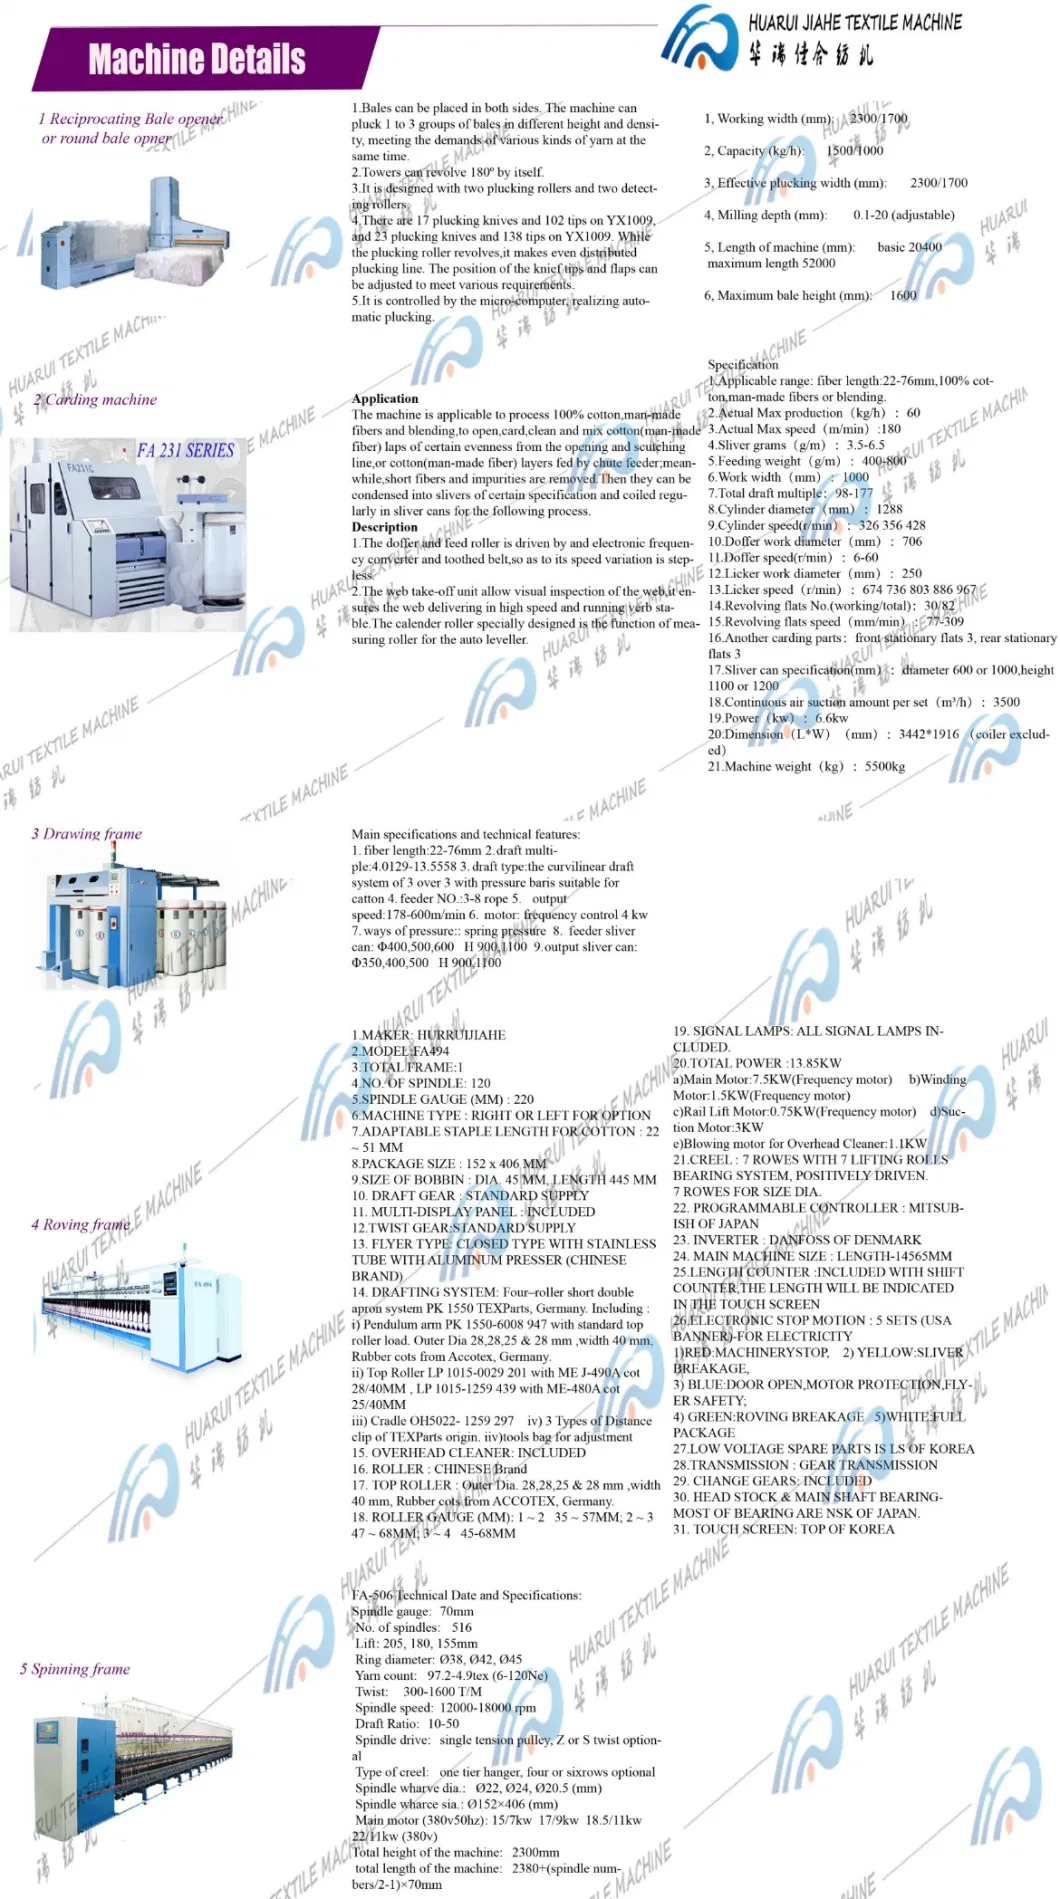 Cheese Dyeing Machine Pneumatic Electric Textile Printing and Dyeing Machinery Dyeing Paddle Rayon Yarn 30/2 Mercerized Cotton Yarn